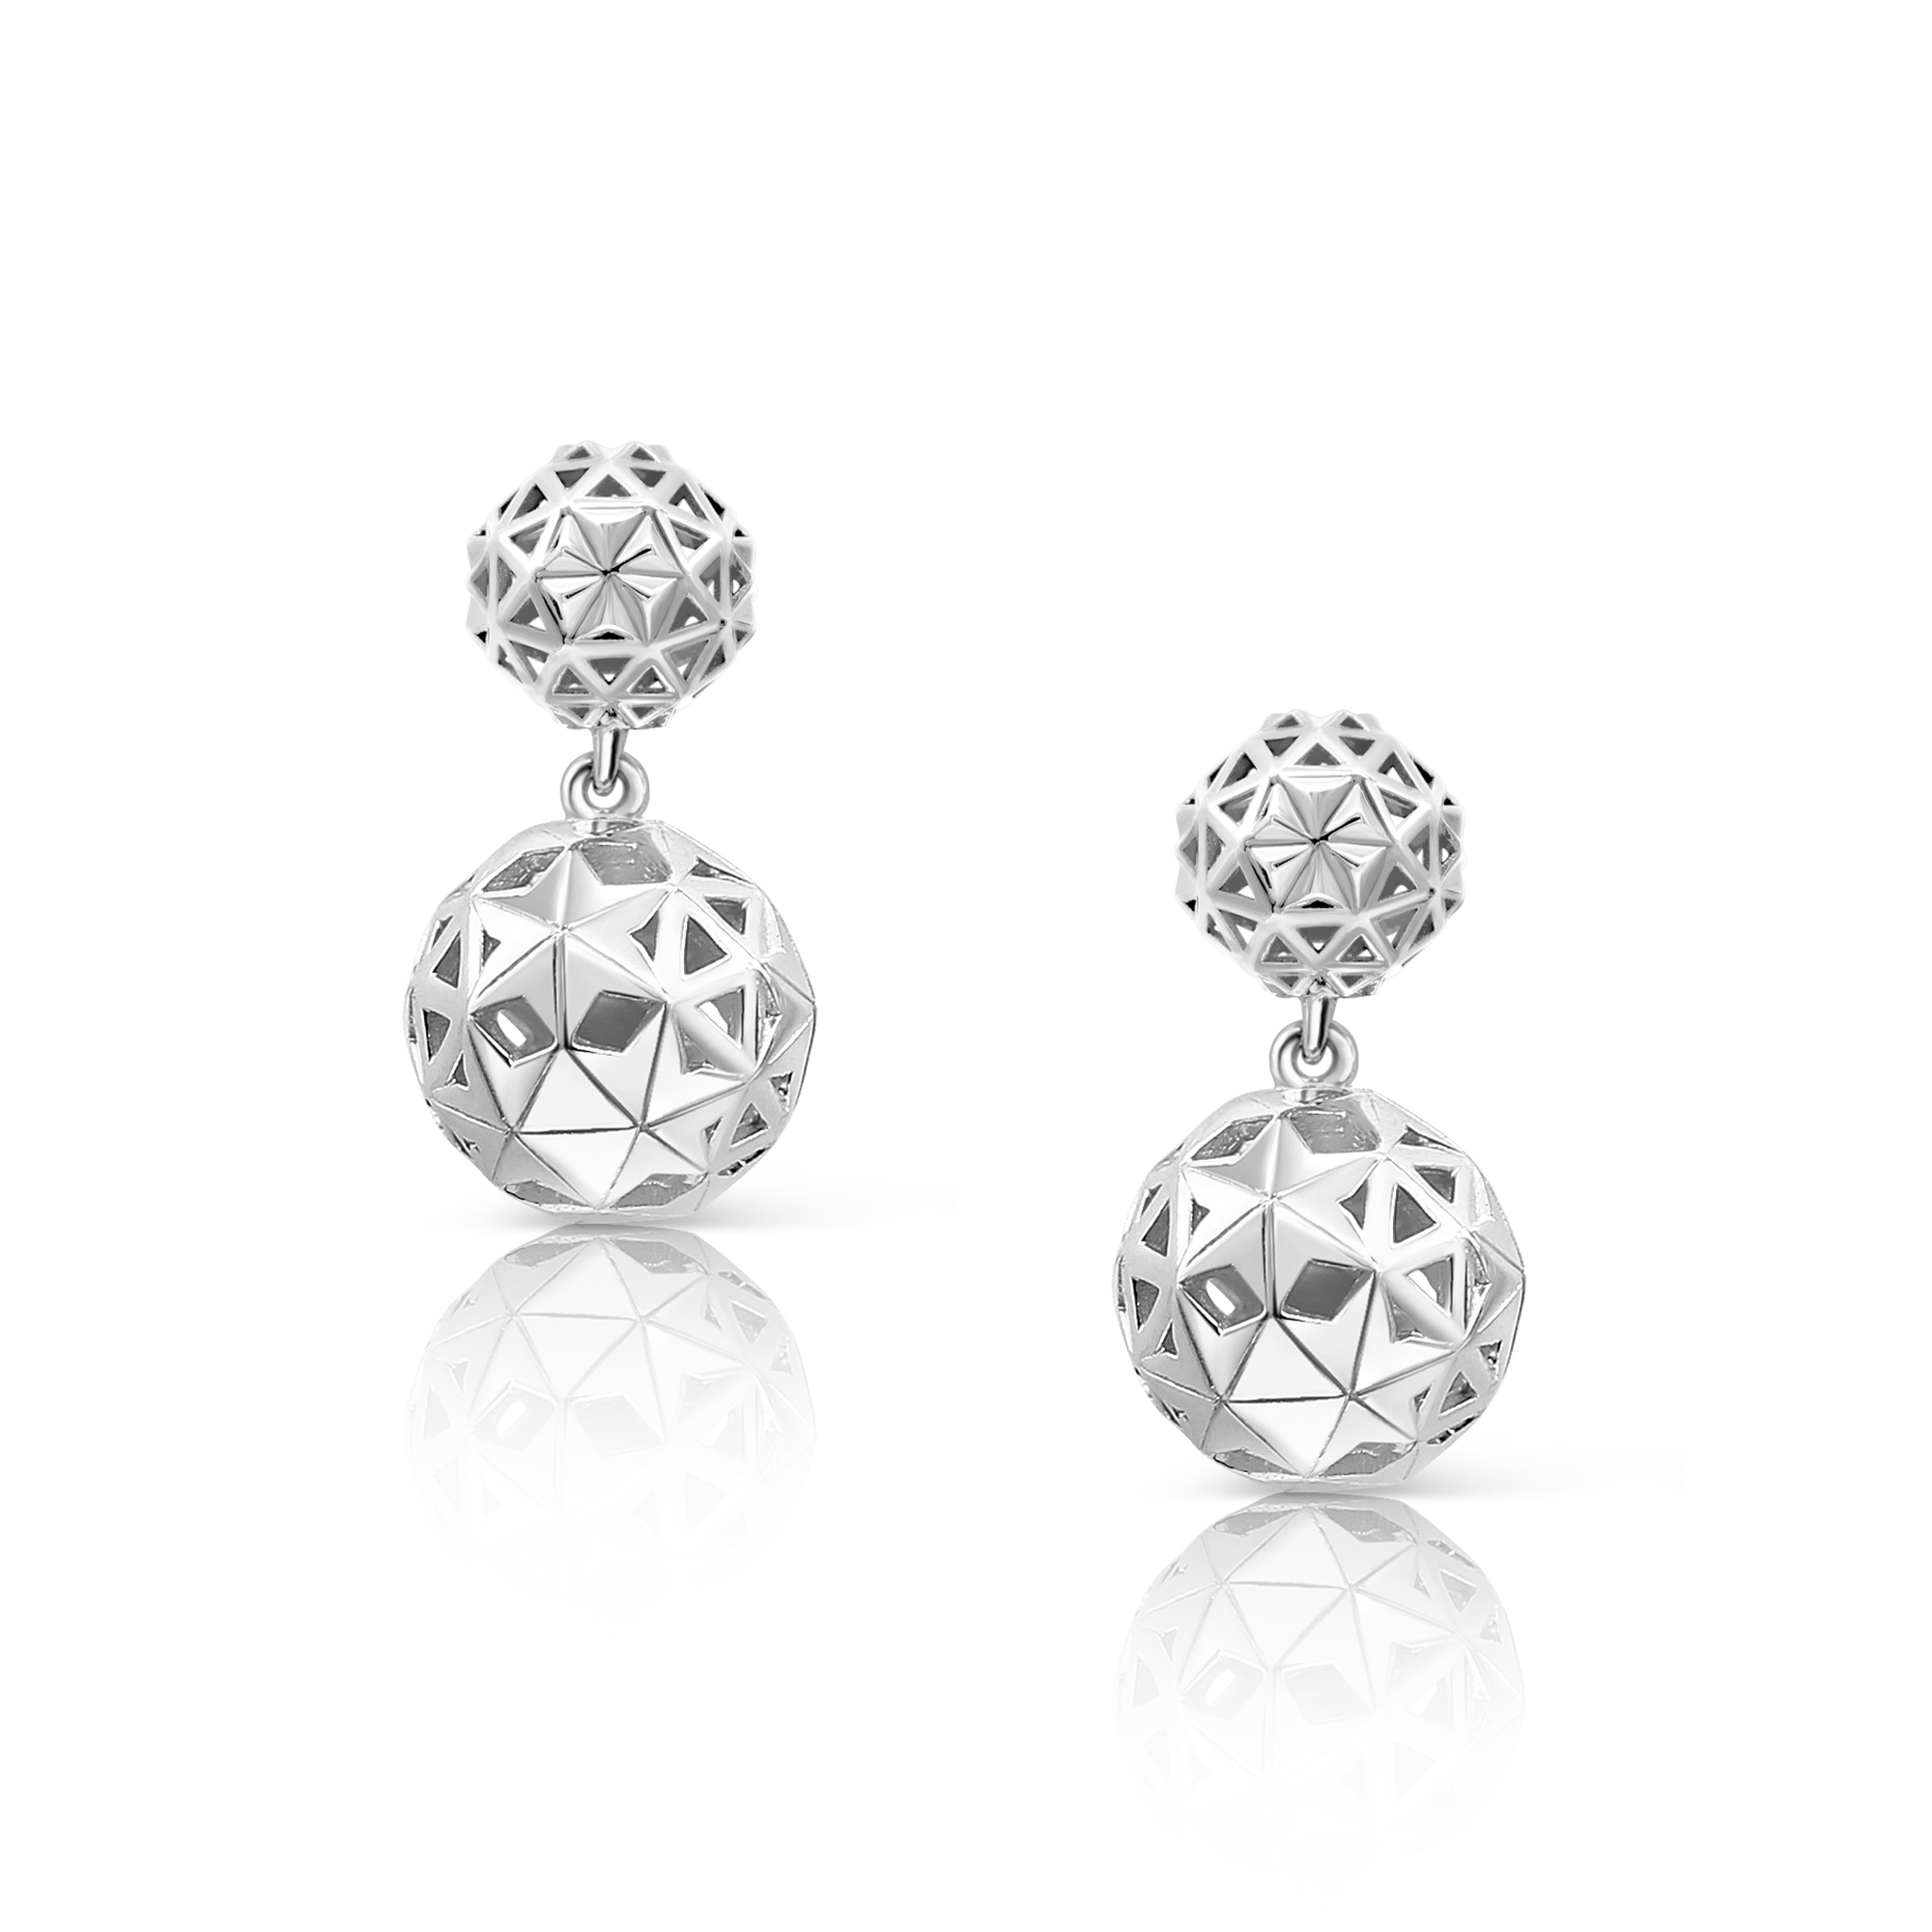 White Rhodium Plated 925 Sterling Silver Earrings Designer Fine Jewelry Polished